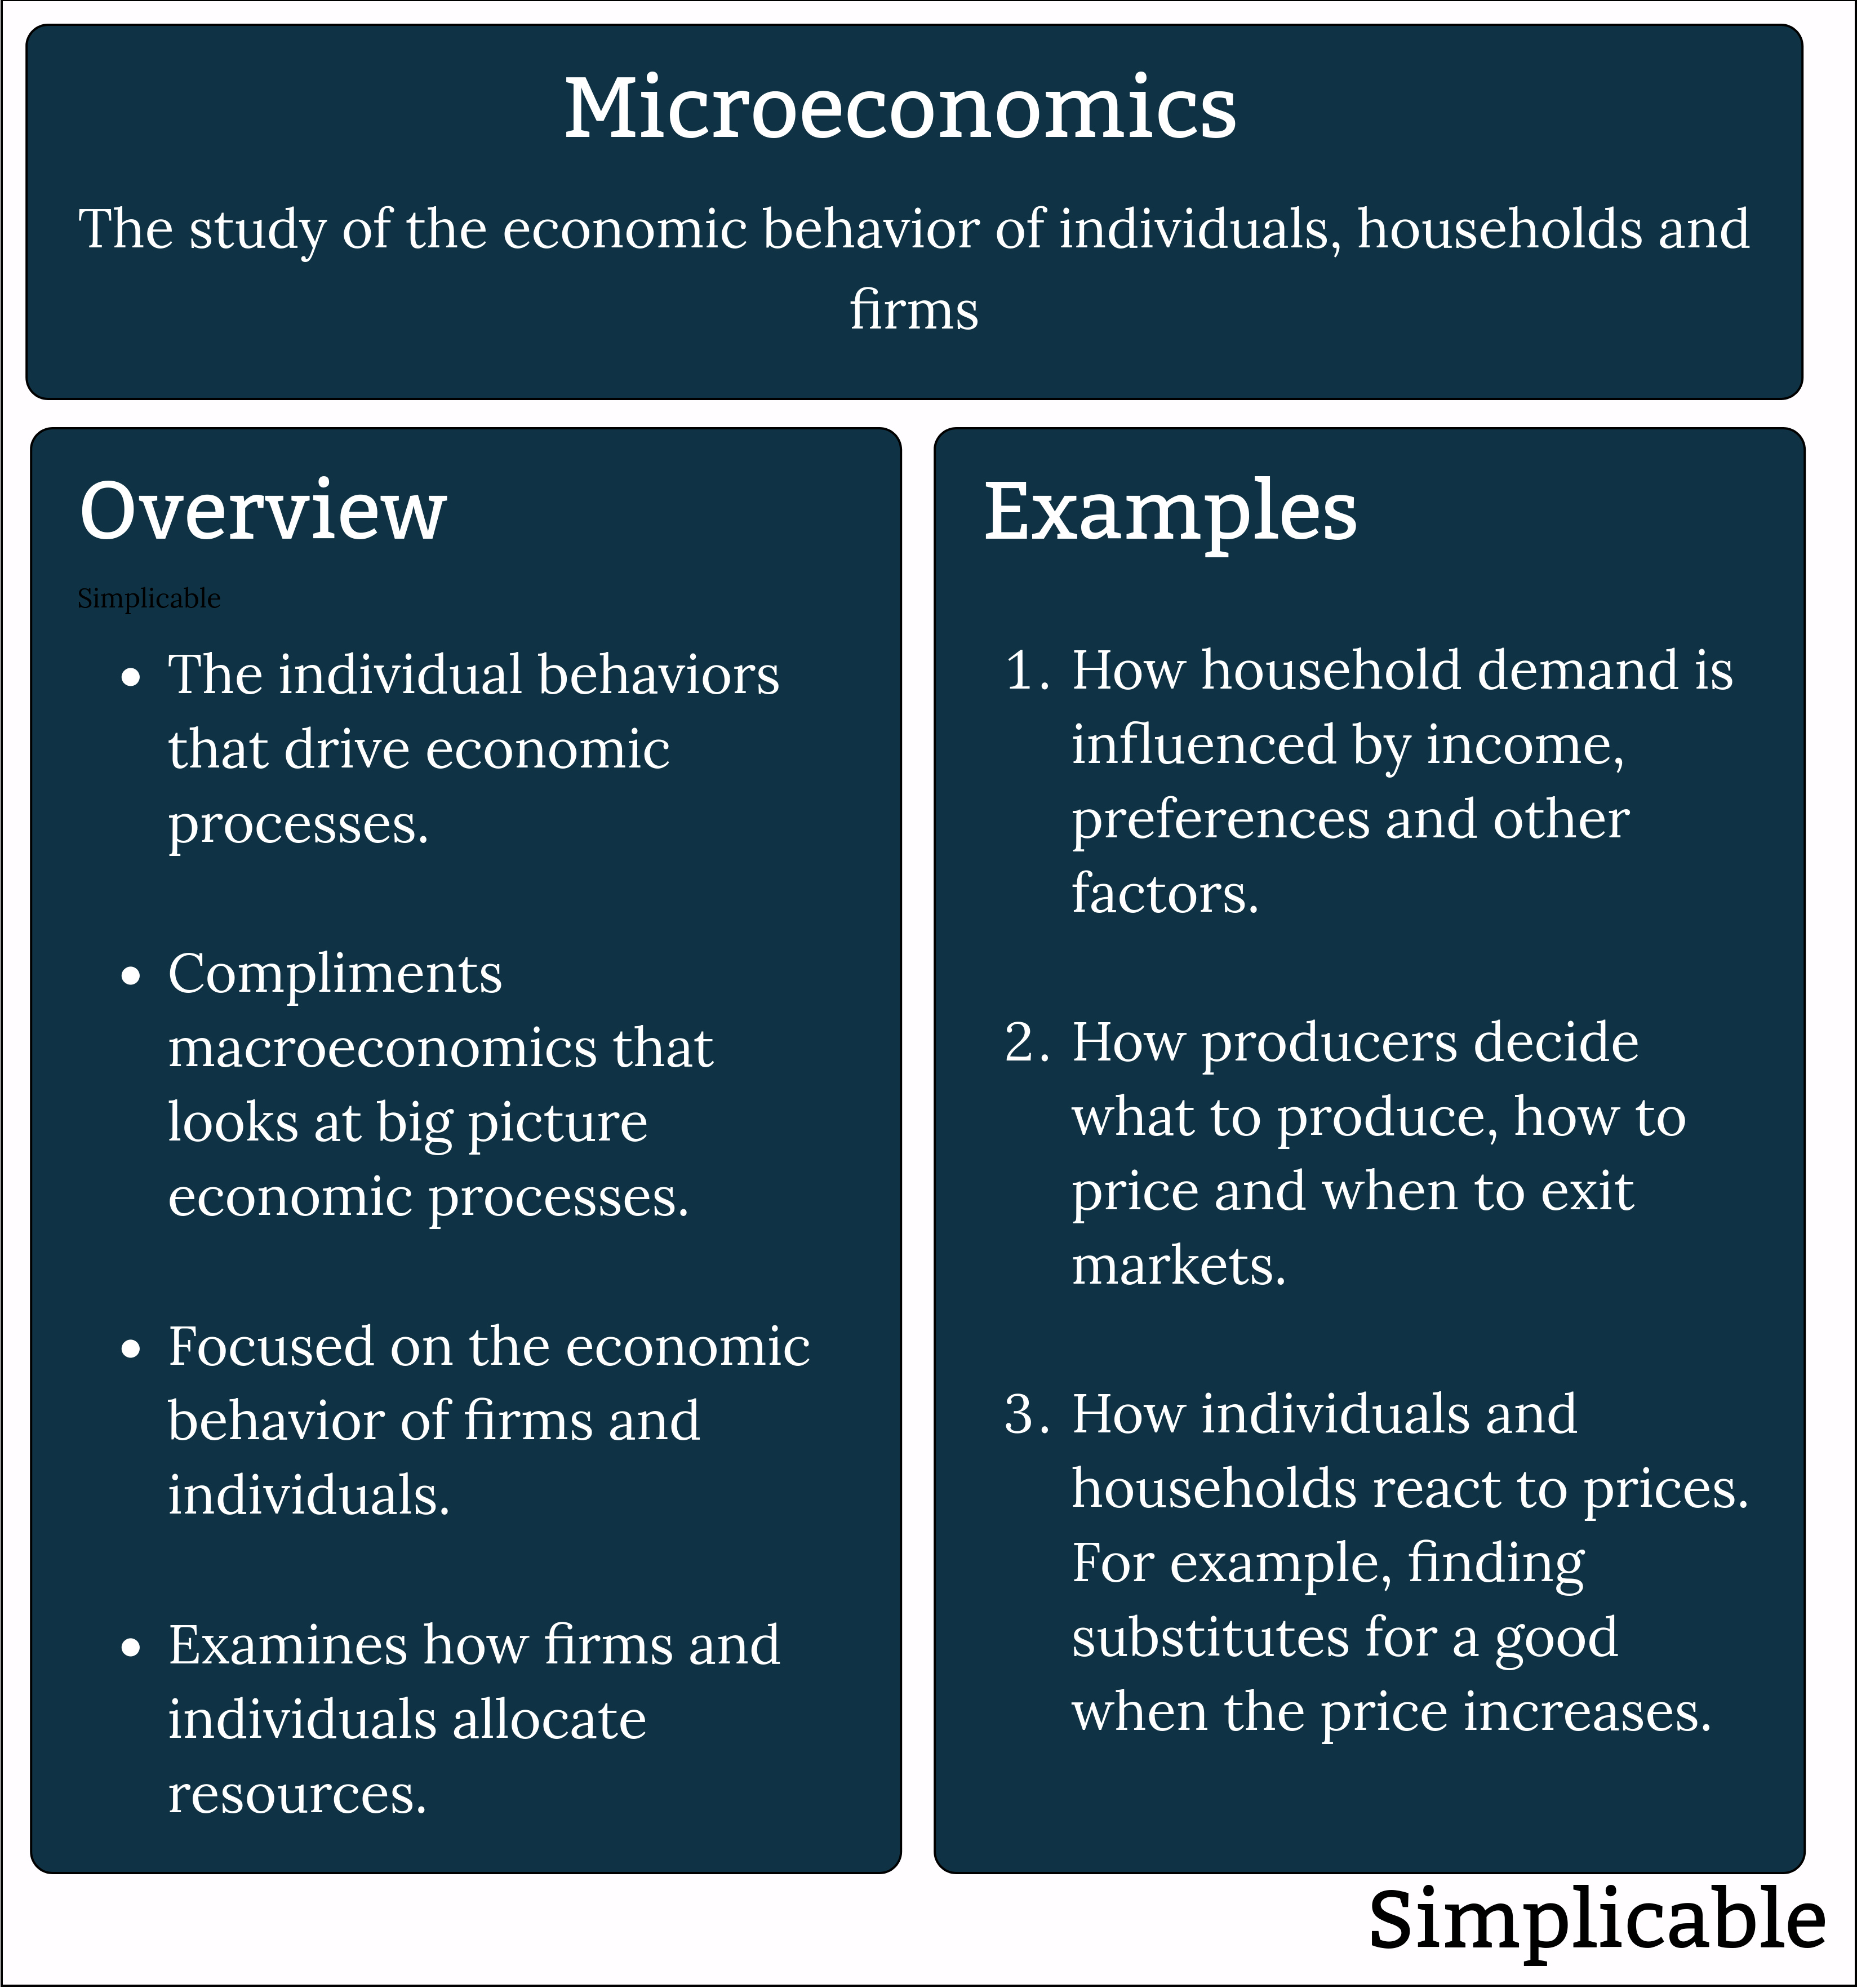 microeconomics definition and examples